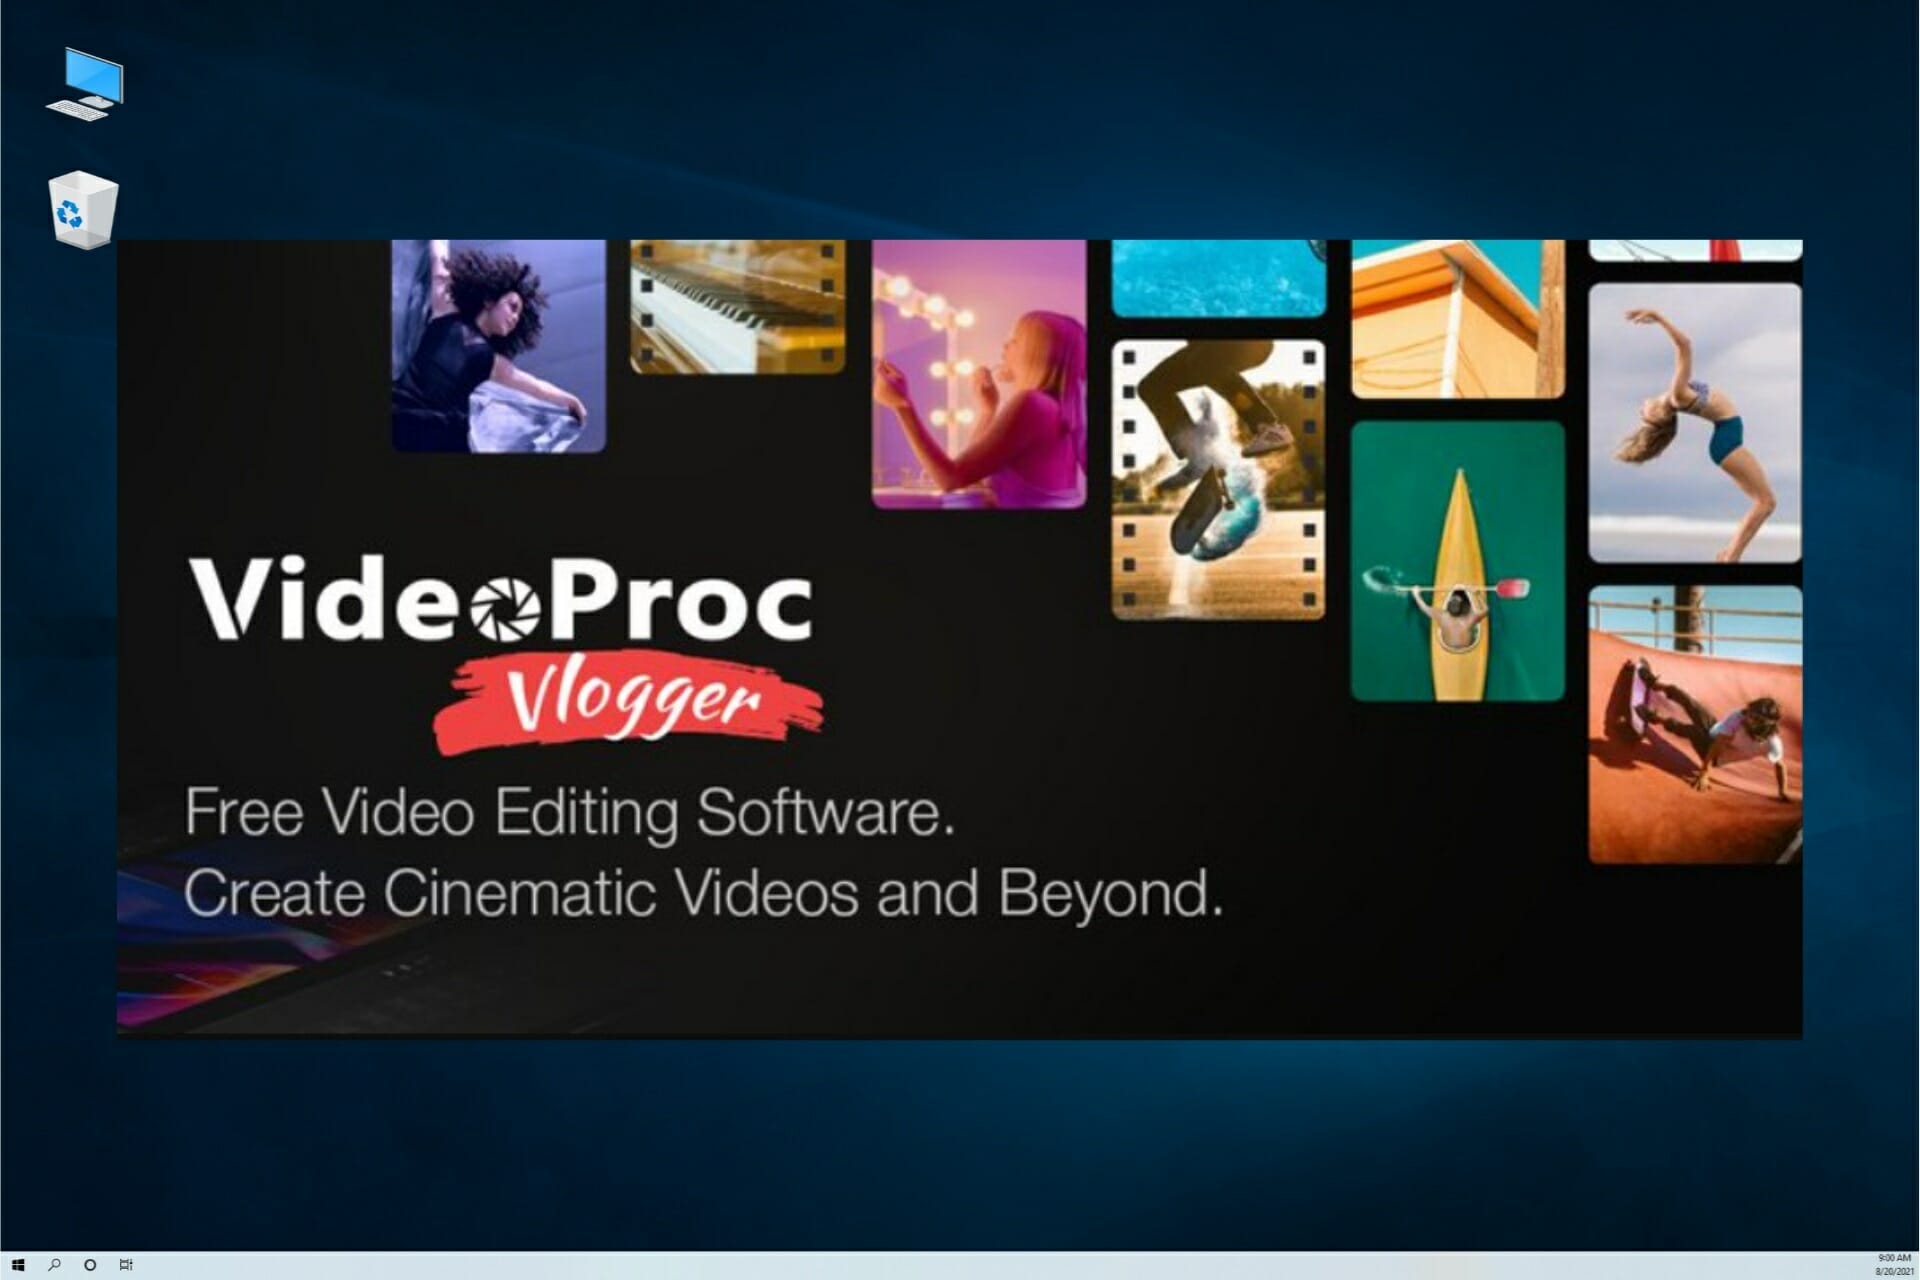 videoproc vlogger pros and cons